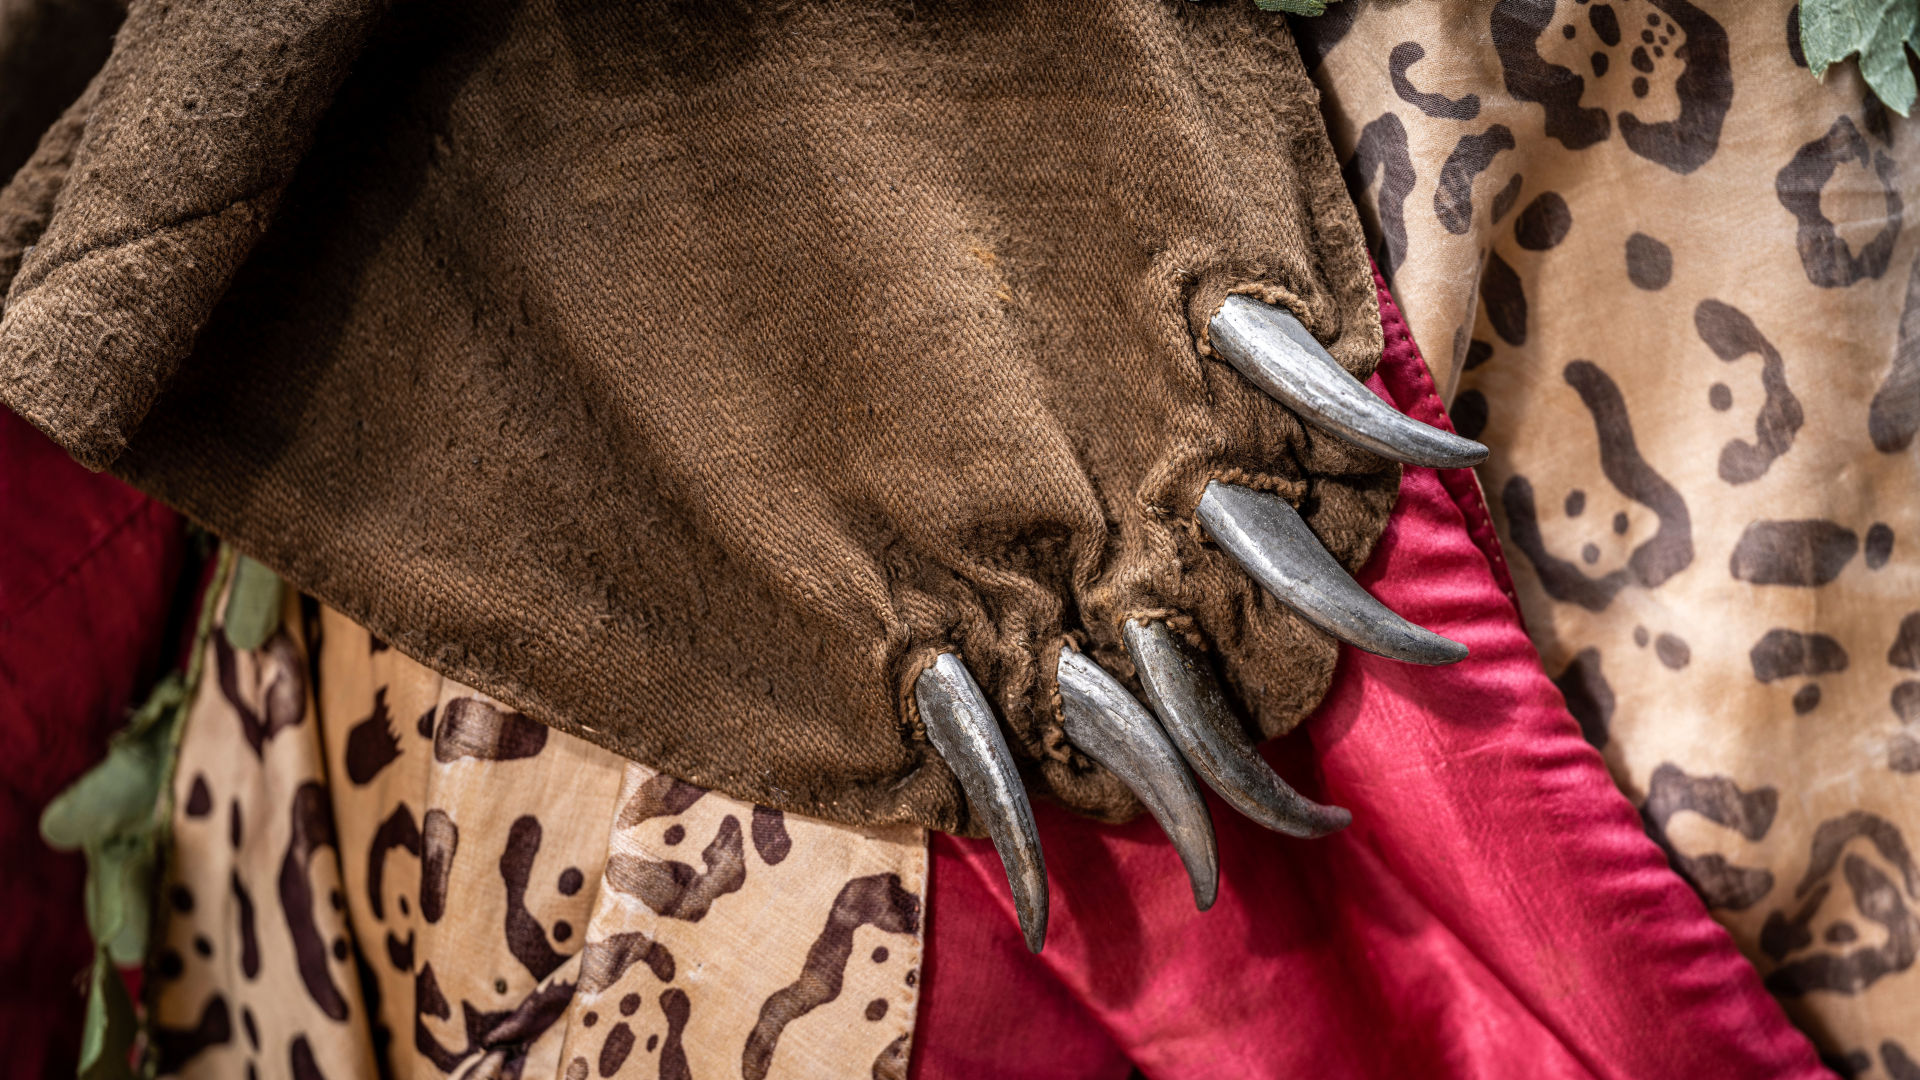 A detail from a costume in silk with a painted leopard pattern. The costume features claws meant to resemble bear fur.